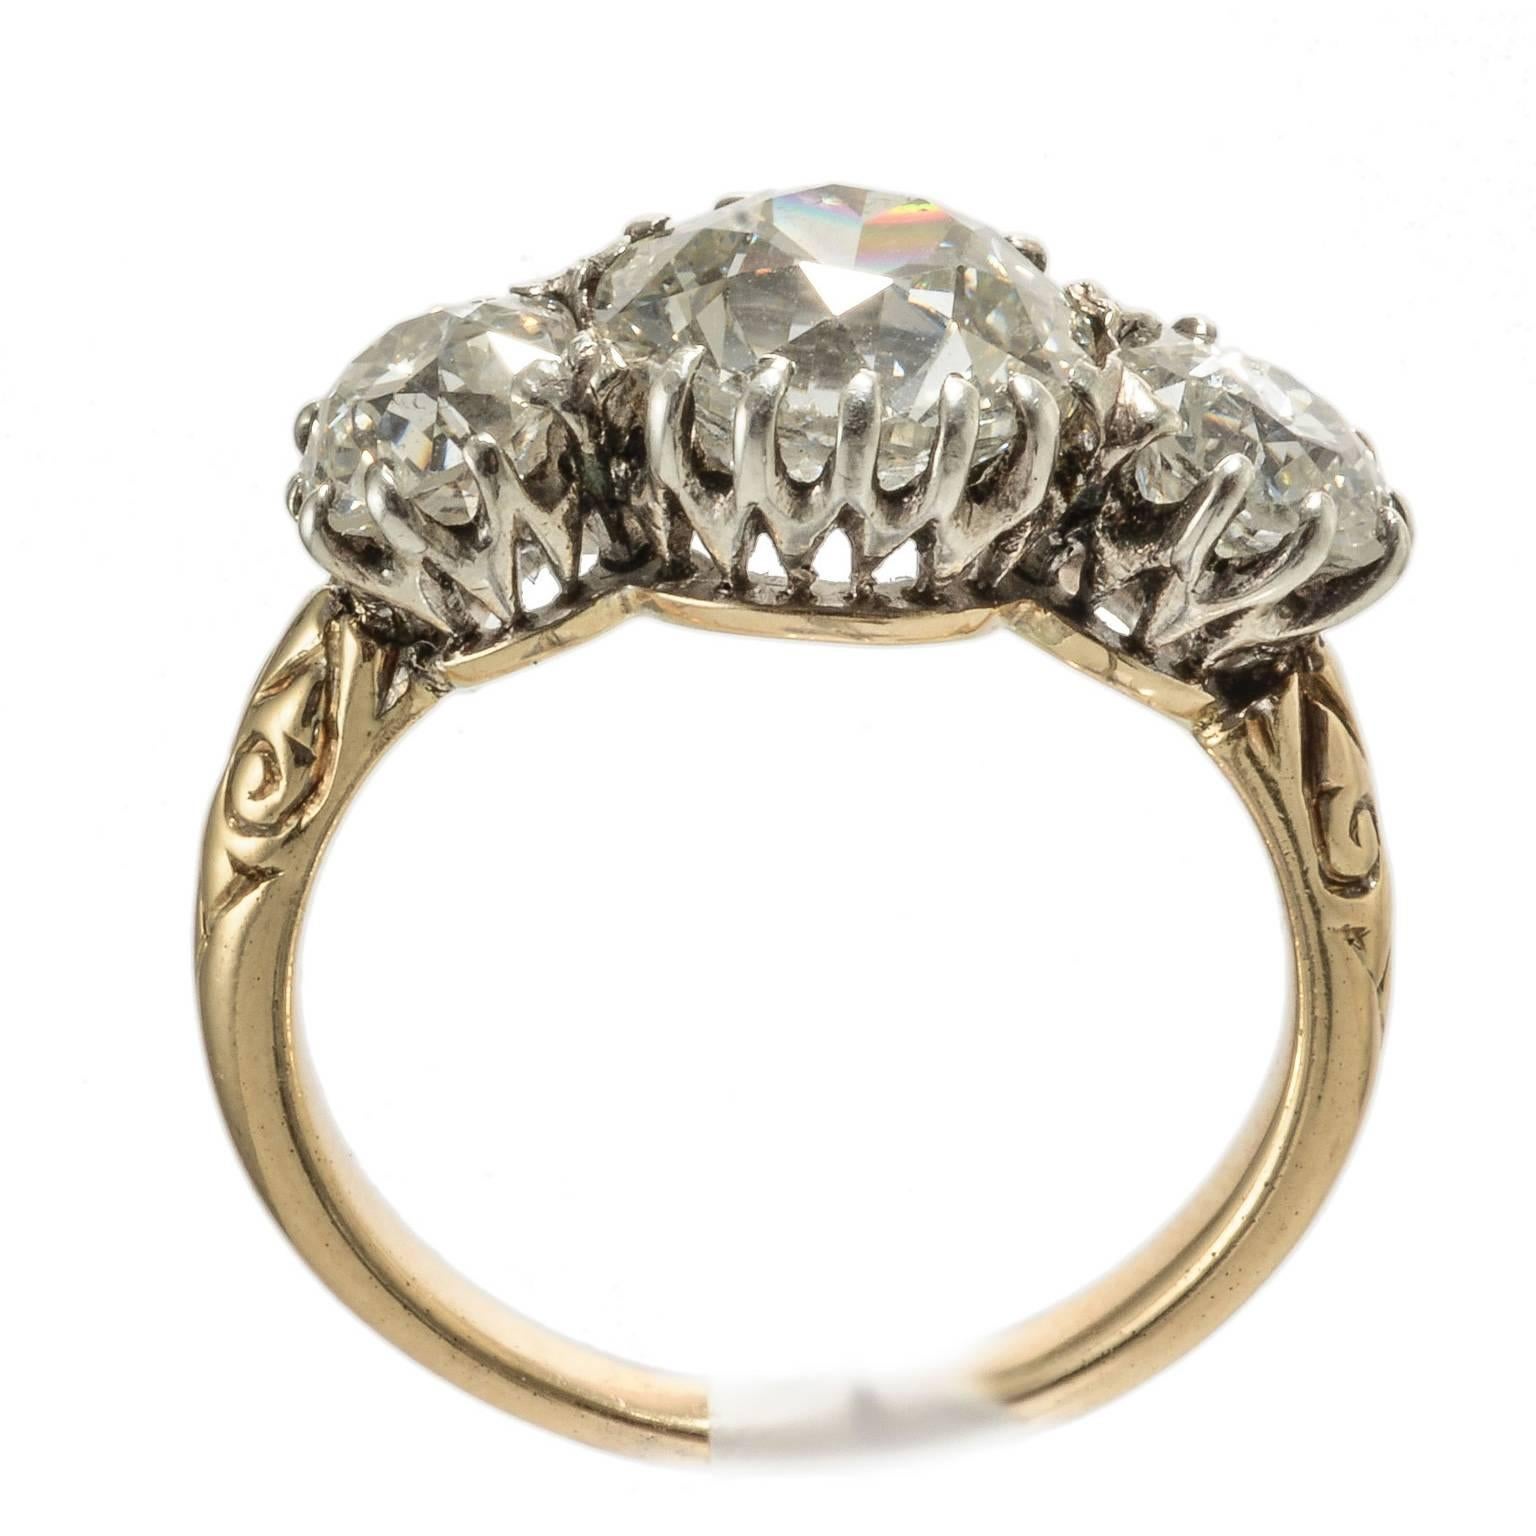 Victorian diamond three stone diamond ring 1900c 
2.80ct centre old cut with 2x.80pts either side in 18ct gold and platinum